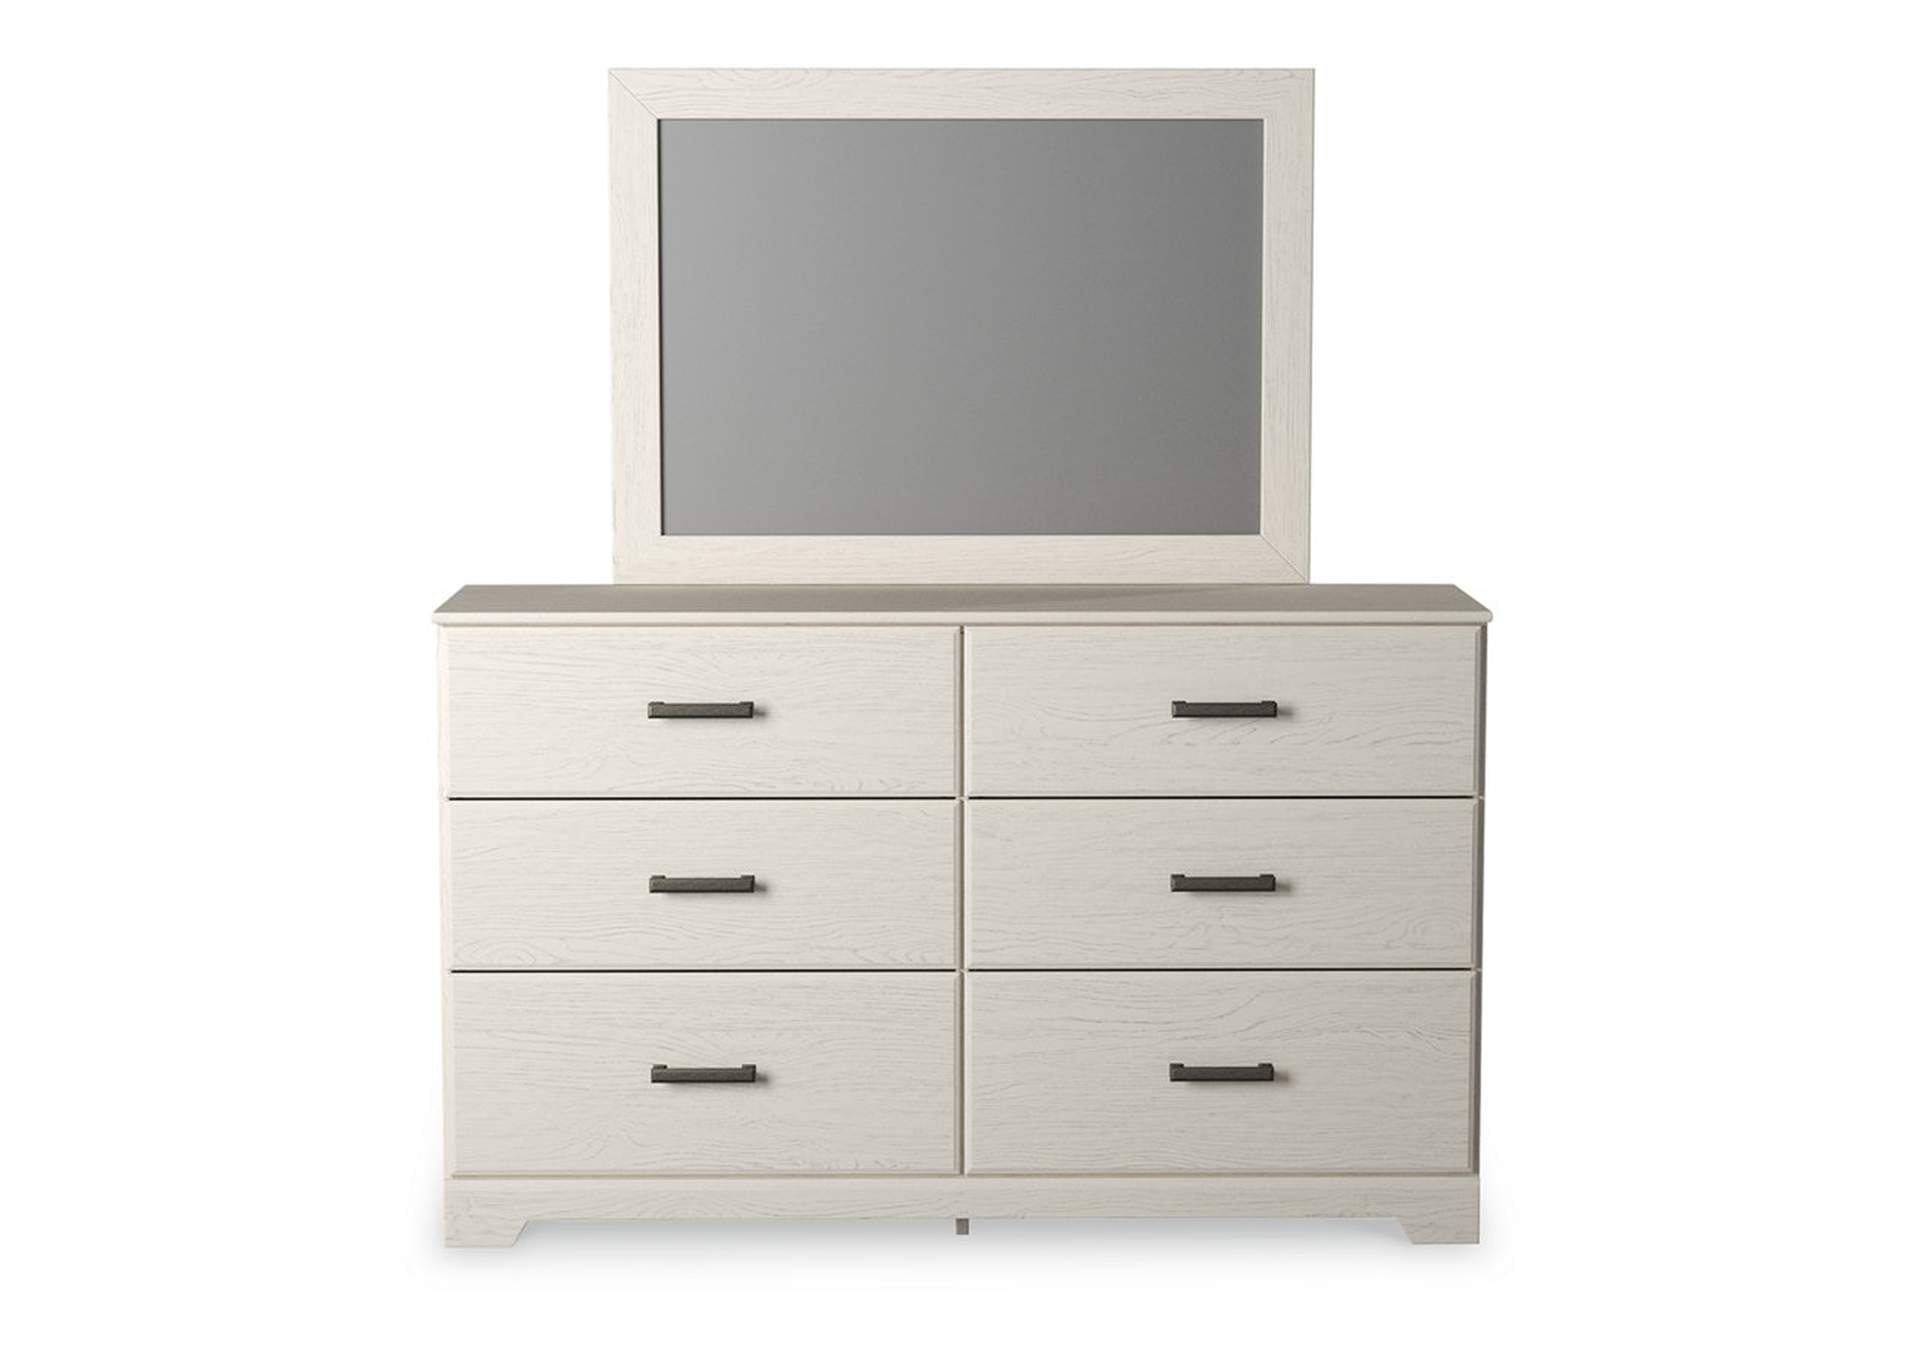 Stelsie Twin Panel Bed with Mirrored Dresser and Chest,Signature Design By Ashley